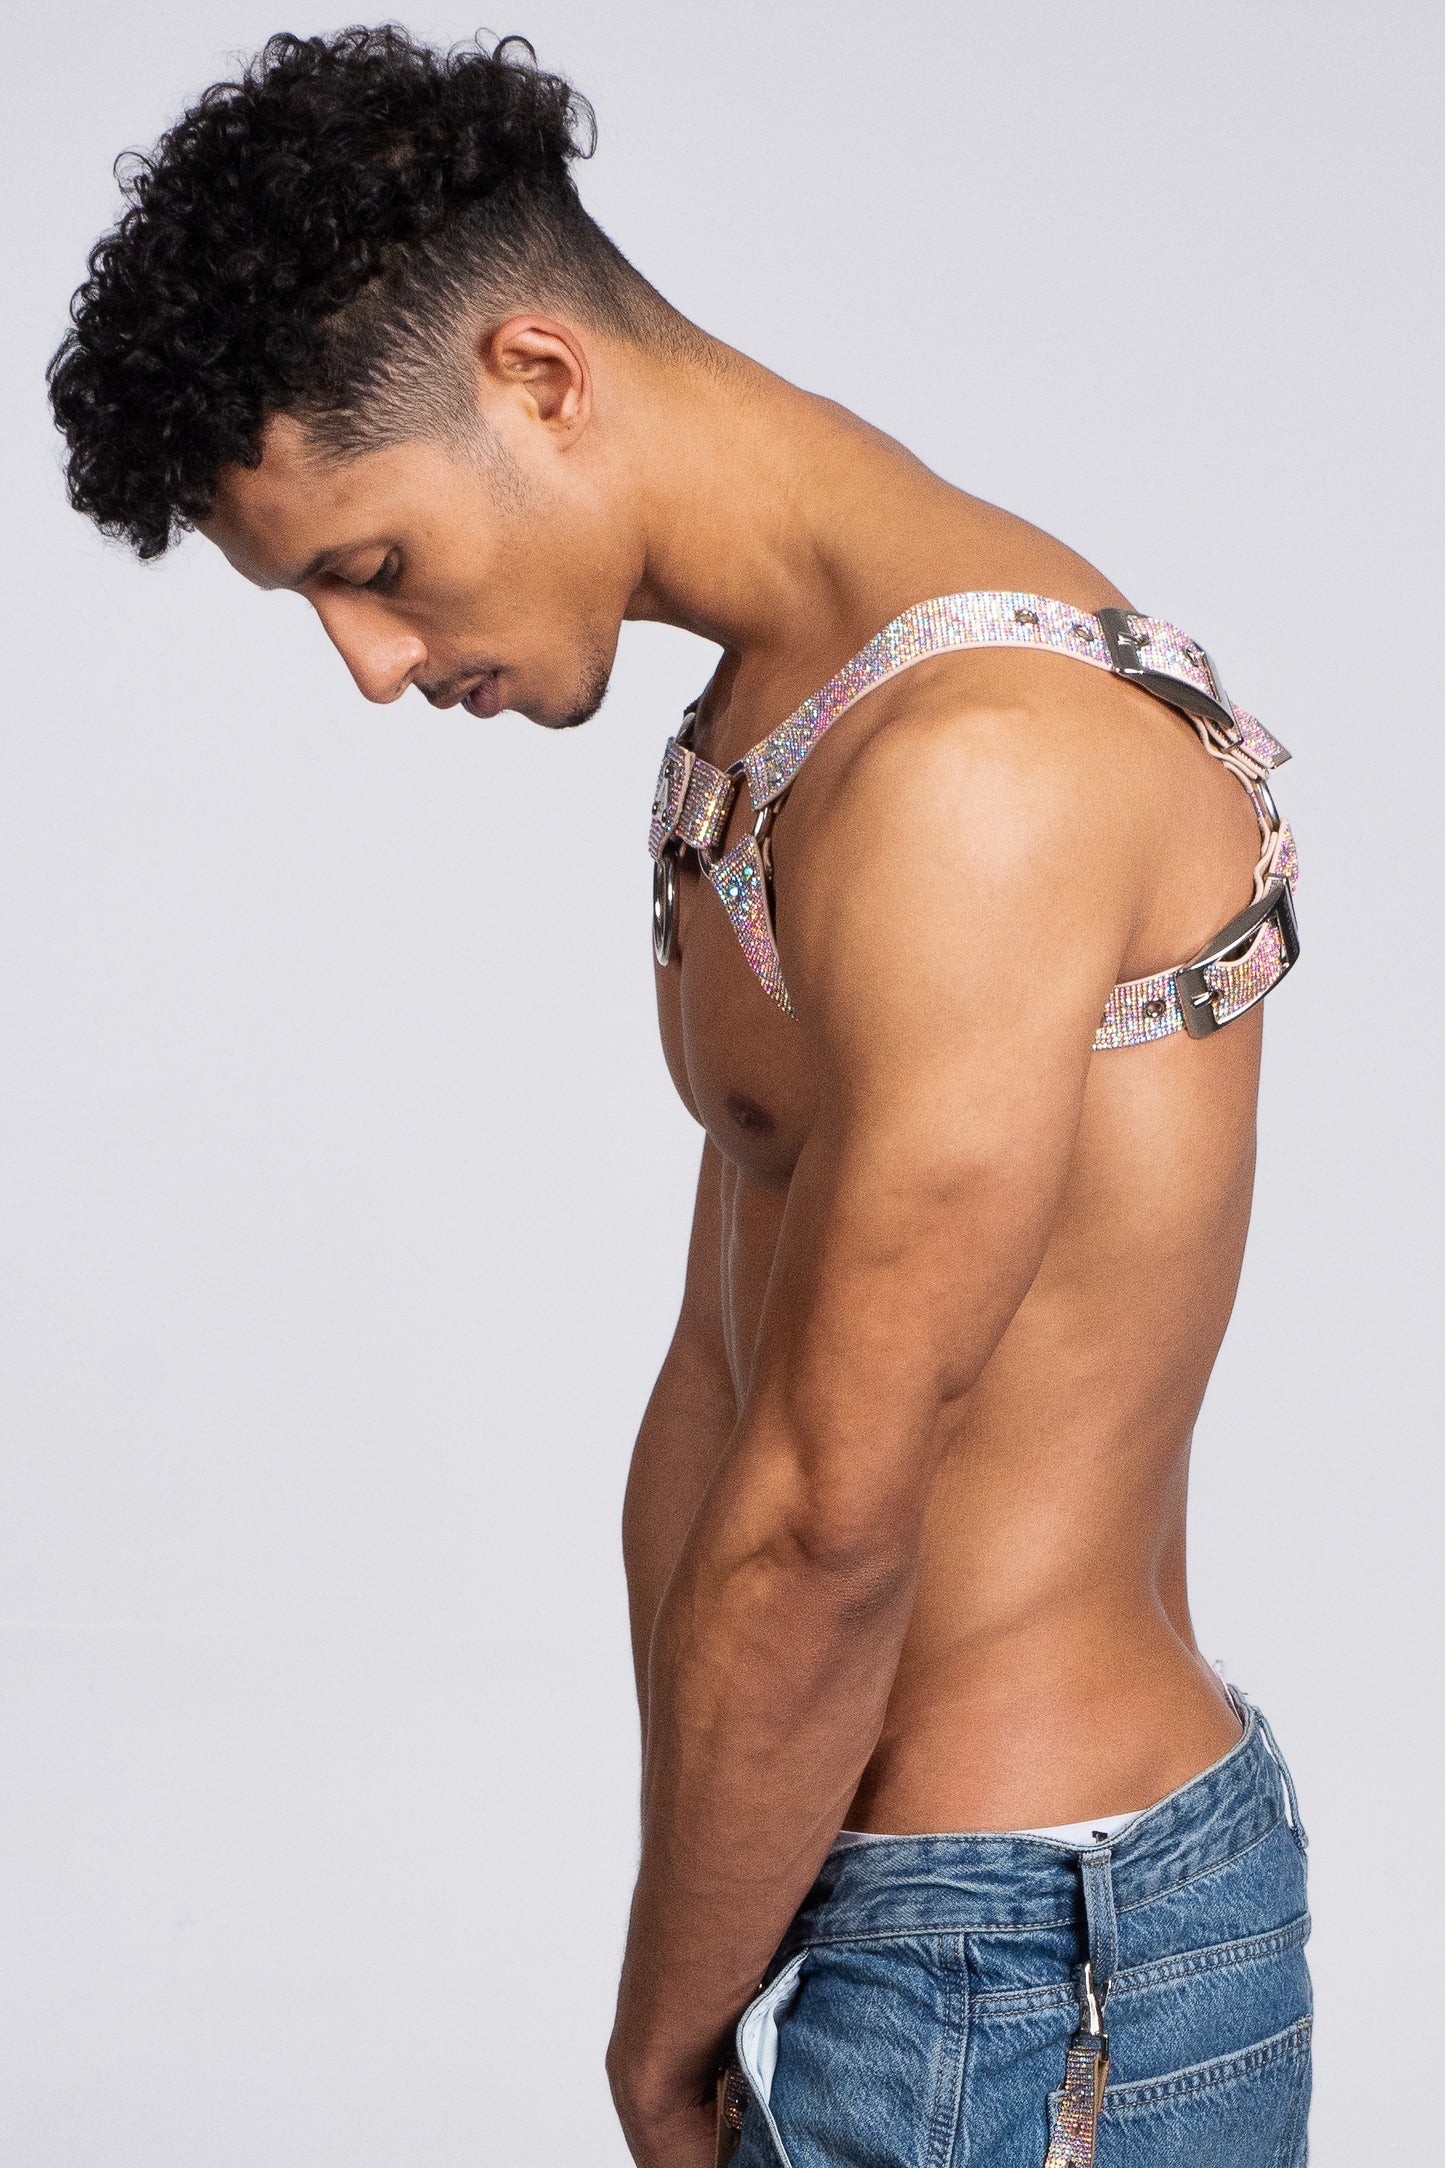 Dazzling multicolored crystal-covered H-Harness, a must-have accessory for confident and stylish individuals at LGBTQ+ events.